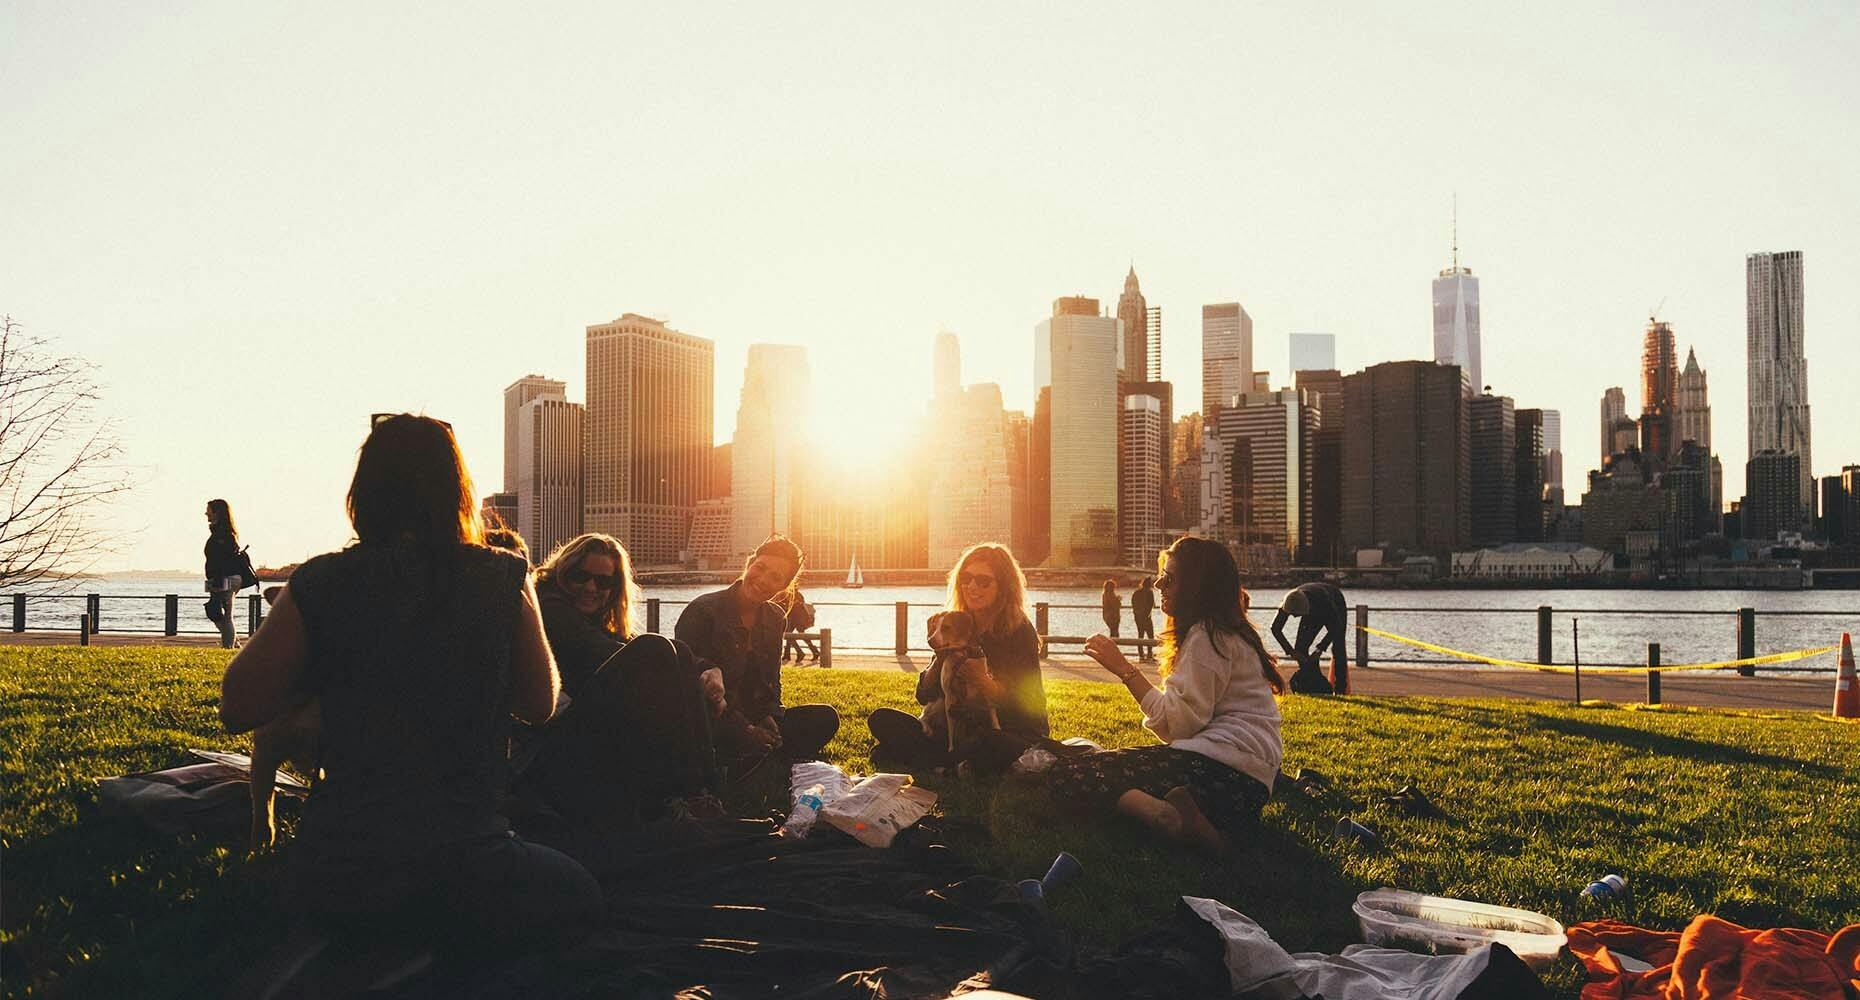 Group of people on a picnic in a city park